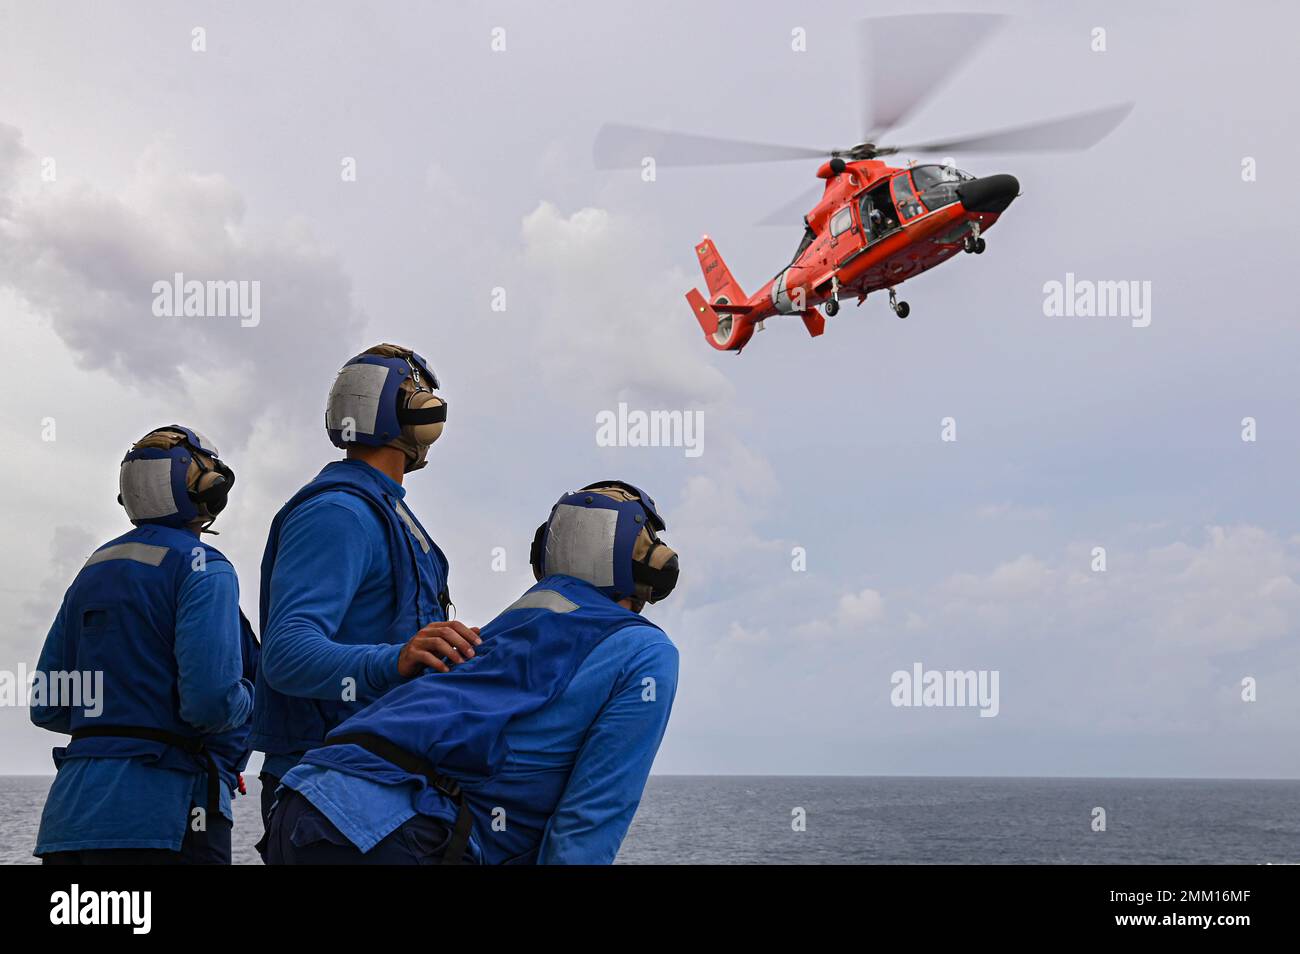 An MH-65 Dolphin helicopter from U.S. Coast Guard Air Station Barbers Point approaches for a landing while crewmembers aboard Coast Guard Cutter Midgett (WMSL 757) prepare to tie-down the aircraft after it lands on Sep. 13, 2022. The flight crew and helicopter are temporarily deployed in support of the 2022 Western Pacific patrol. Stock Photo